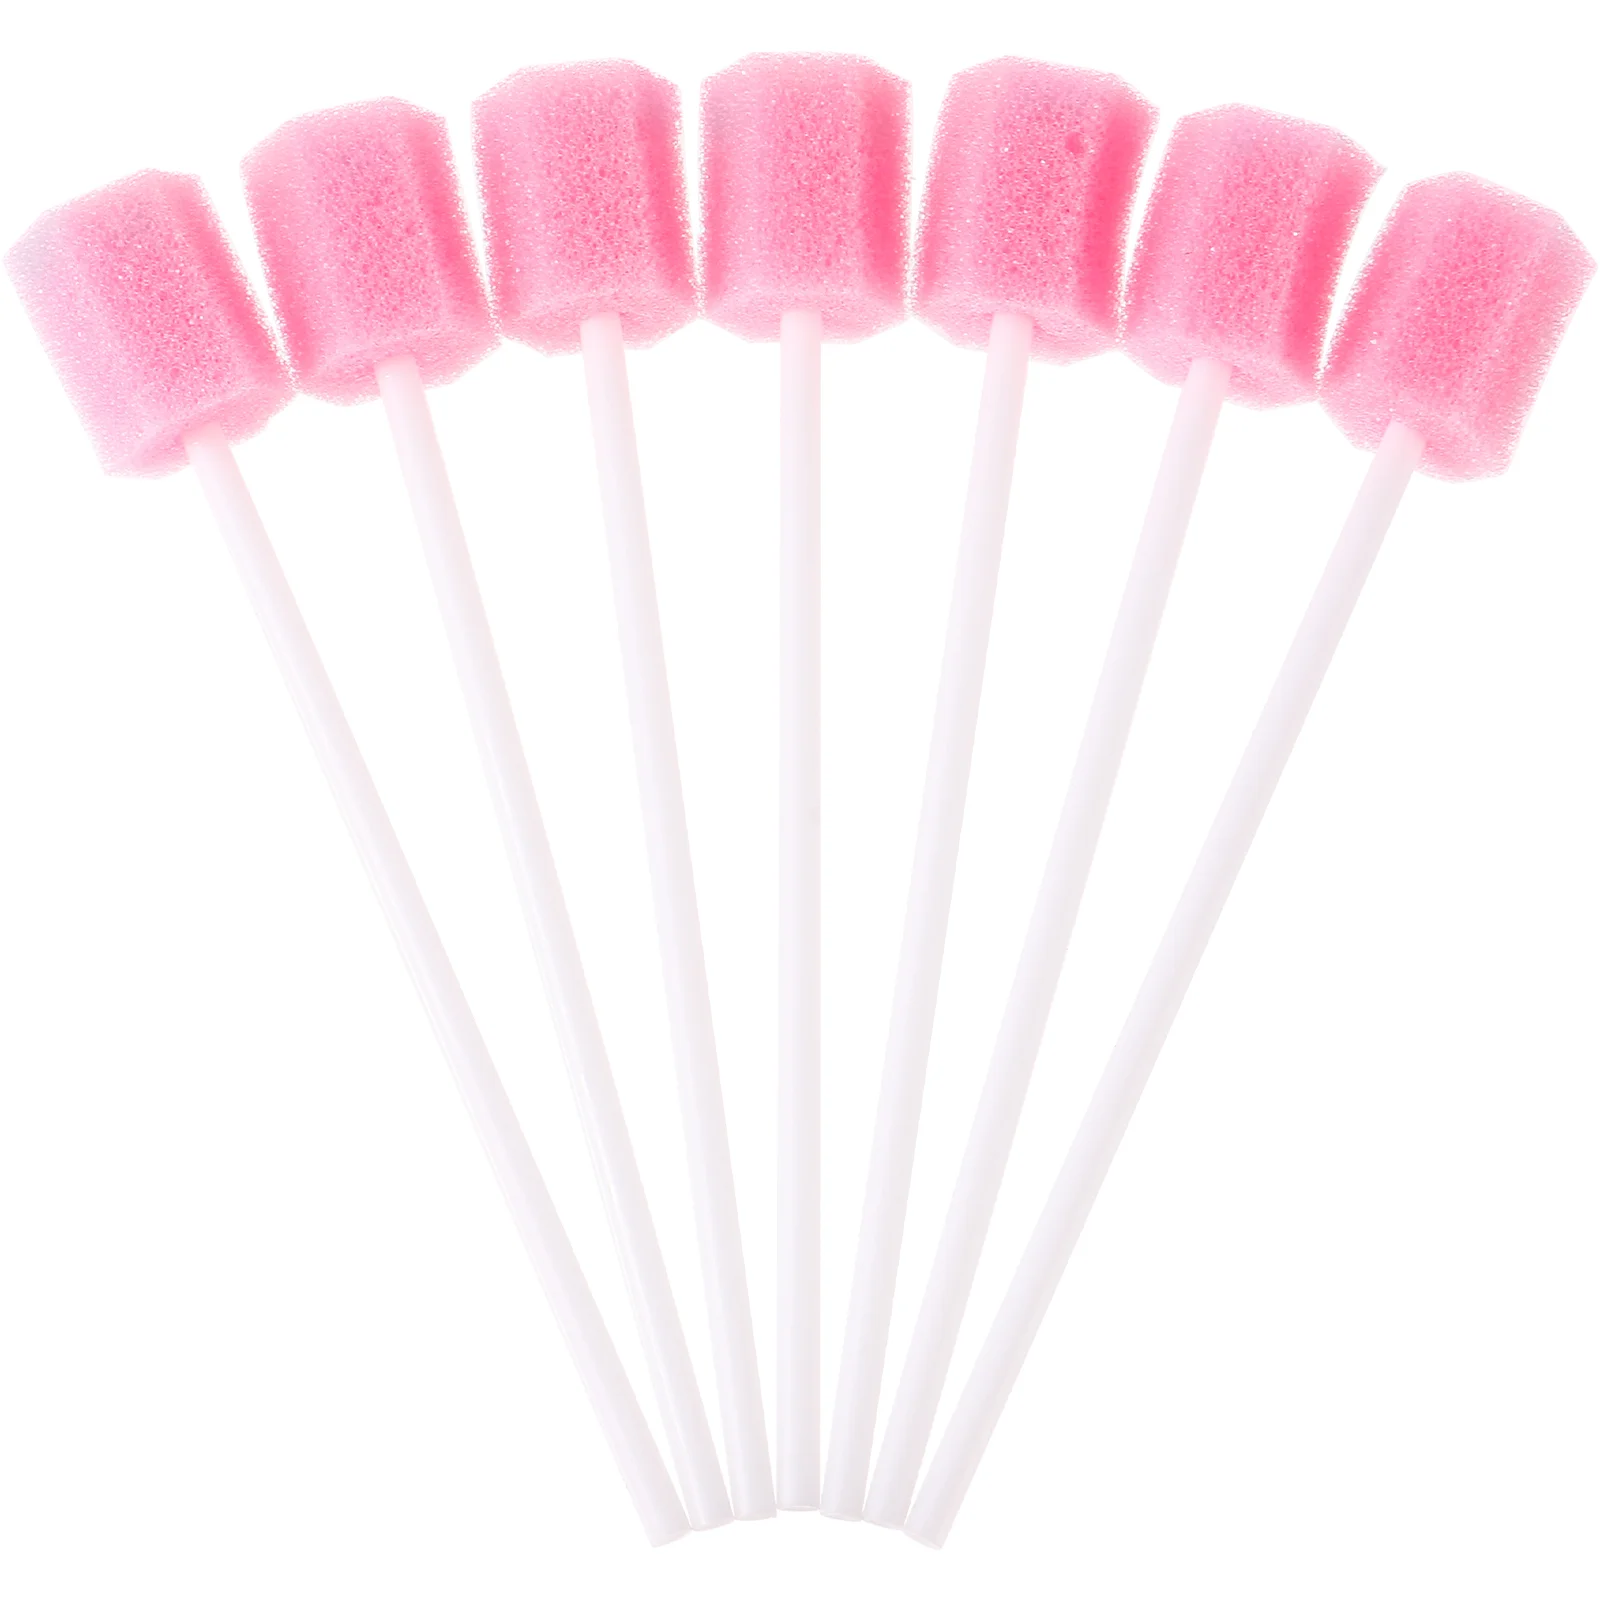 

100 Pcs Mouth Swabs Adult Disposable Sponge Major Dry Sponges Stick Cleaning Swabsteeth Kid Child